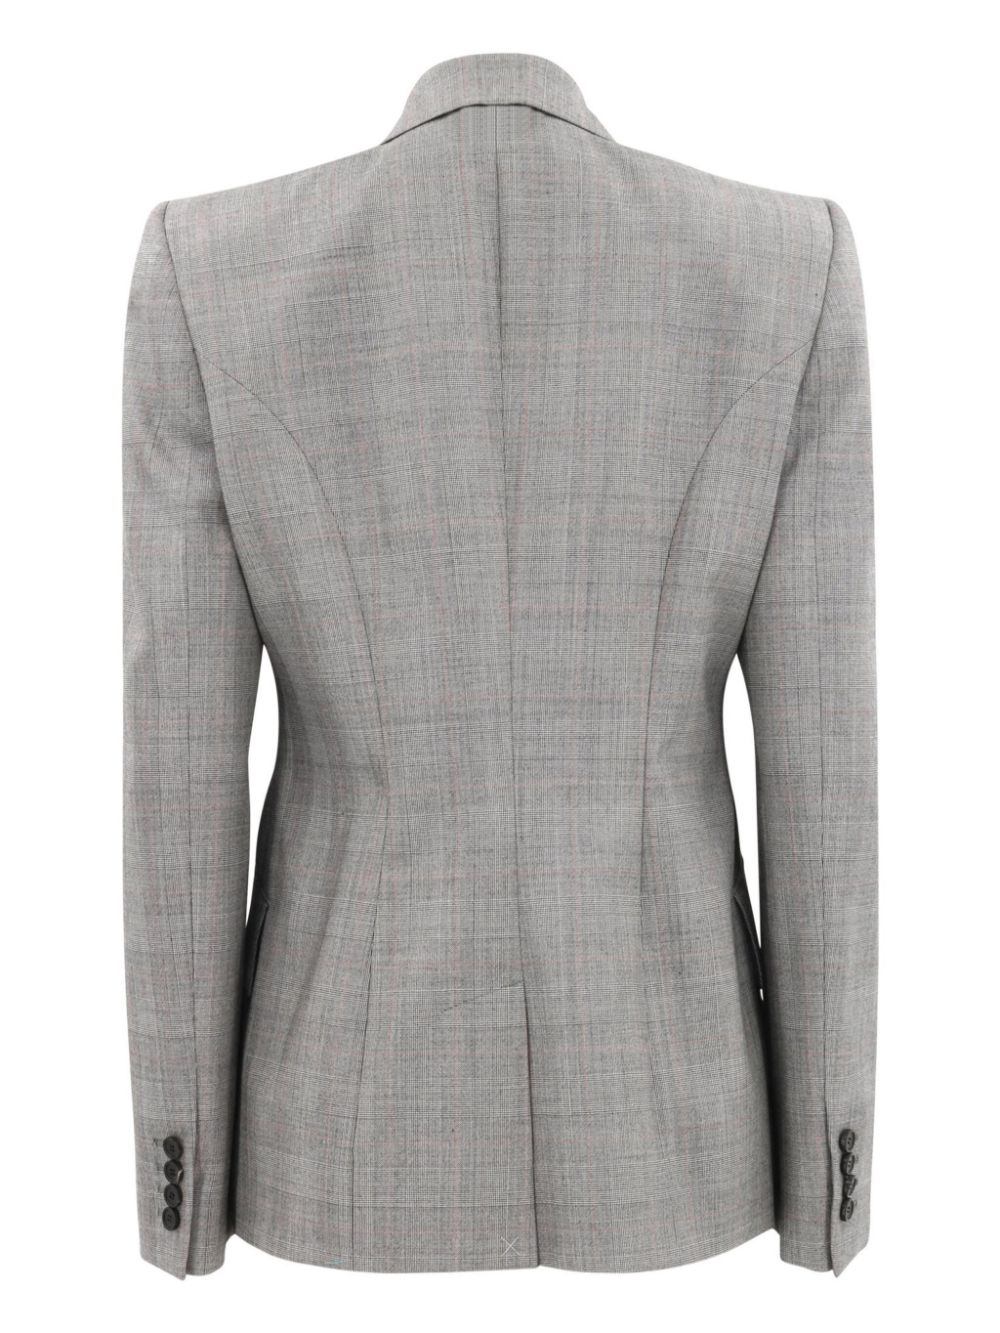 Image 2 of Alexander McQueen Prince of Wales single-breasted blazer